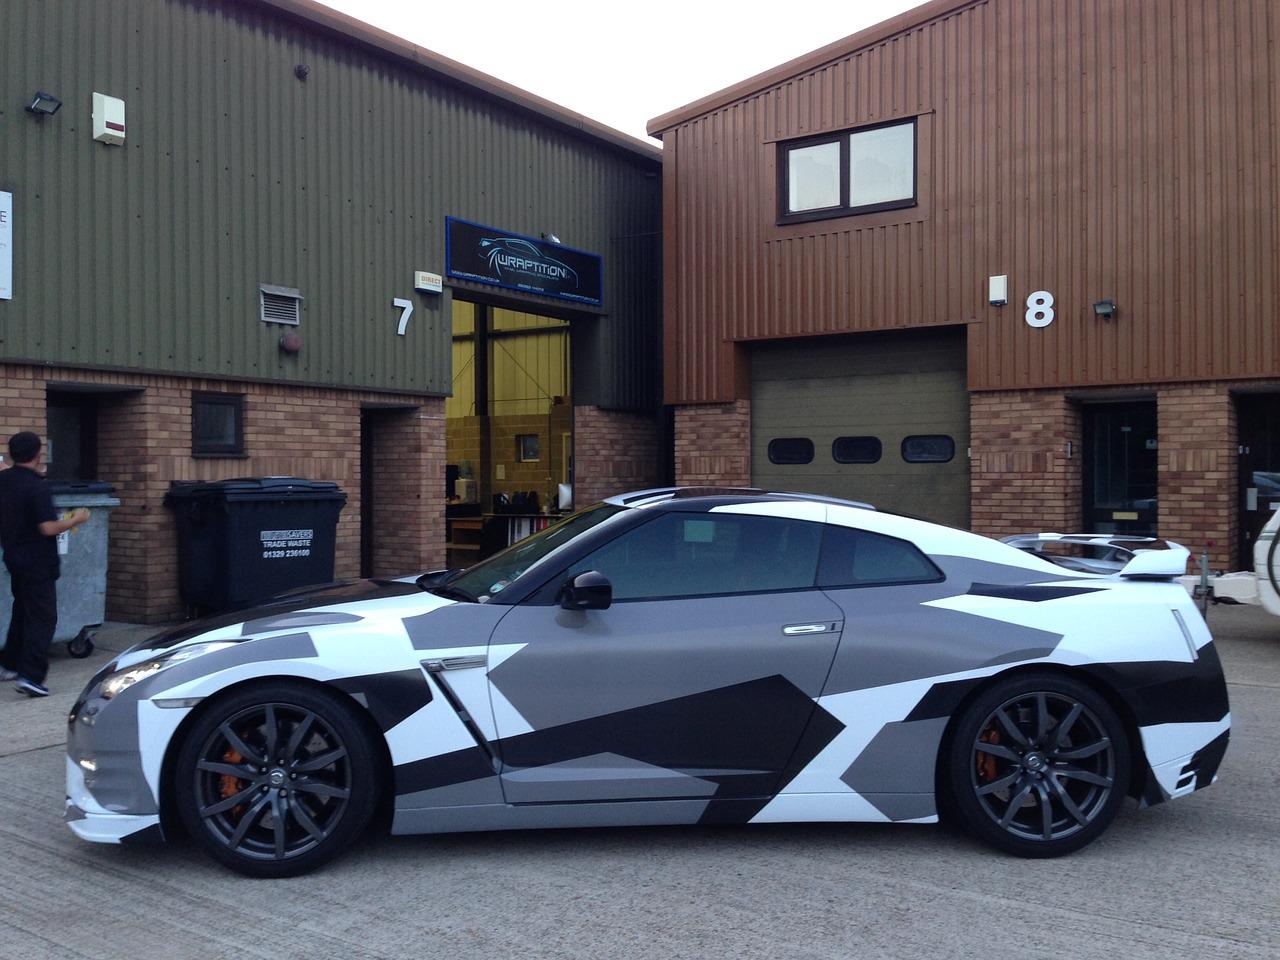 How to Choose the Right Car Vinyl Wrap for Your Needs